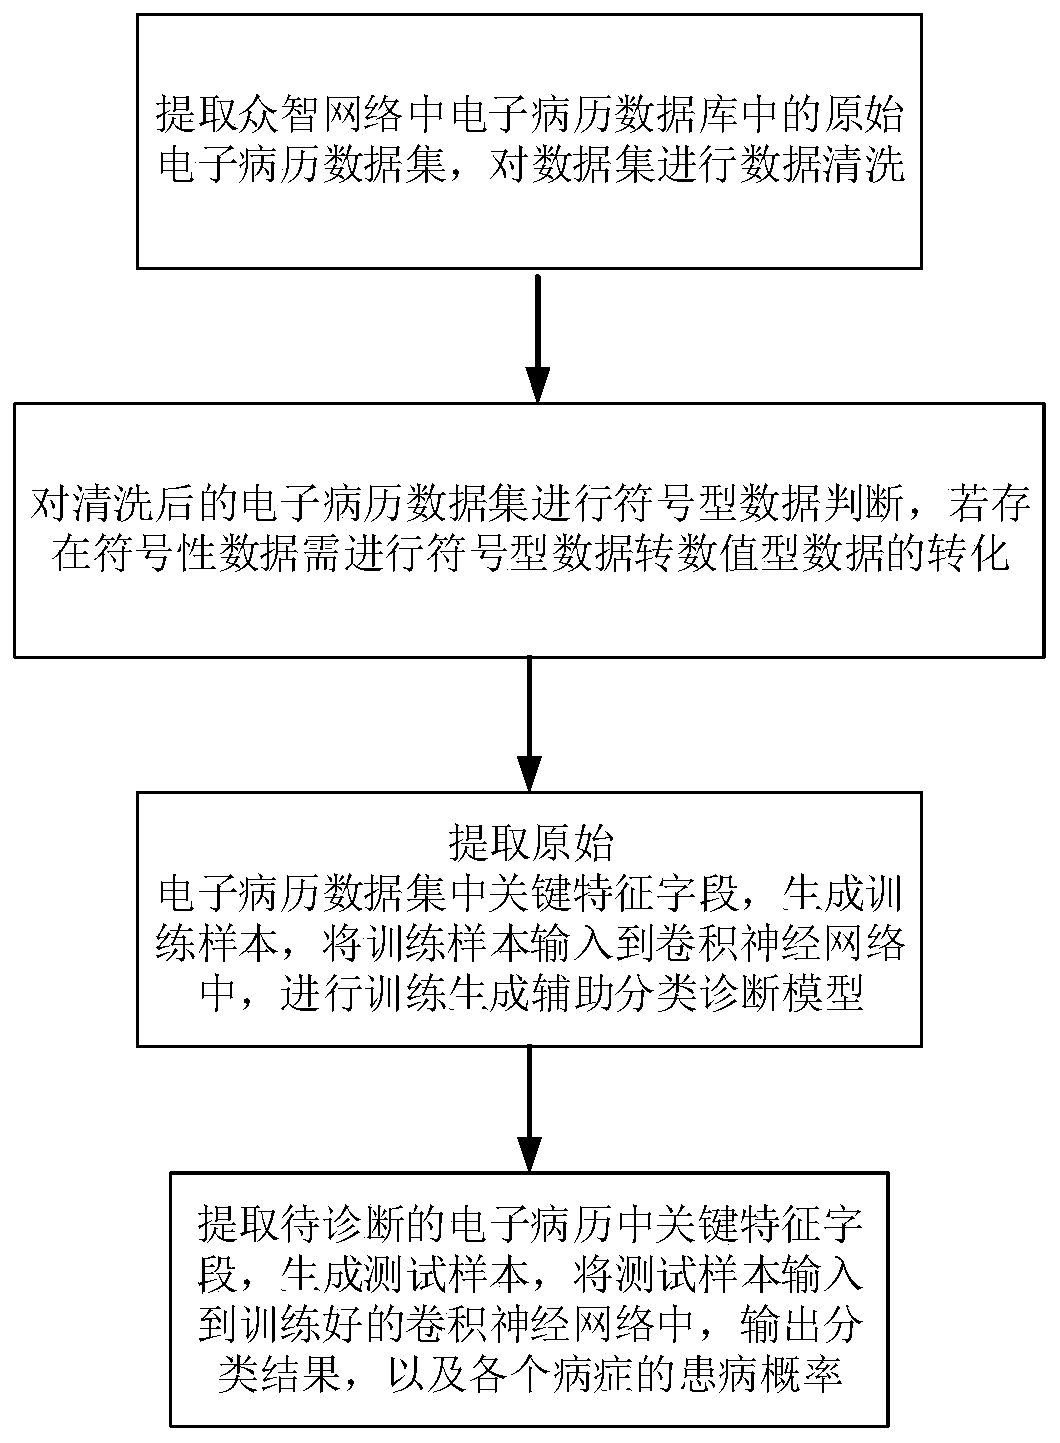 Classification method for processing electronic medical record hybrid data based on crowd network